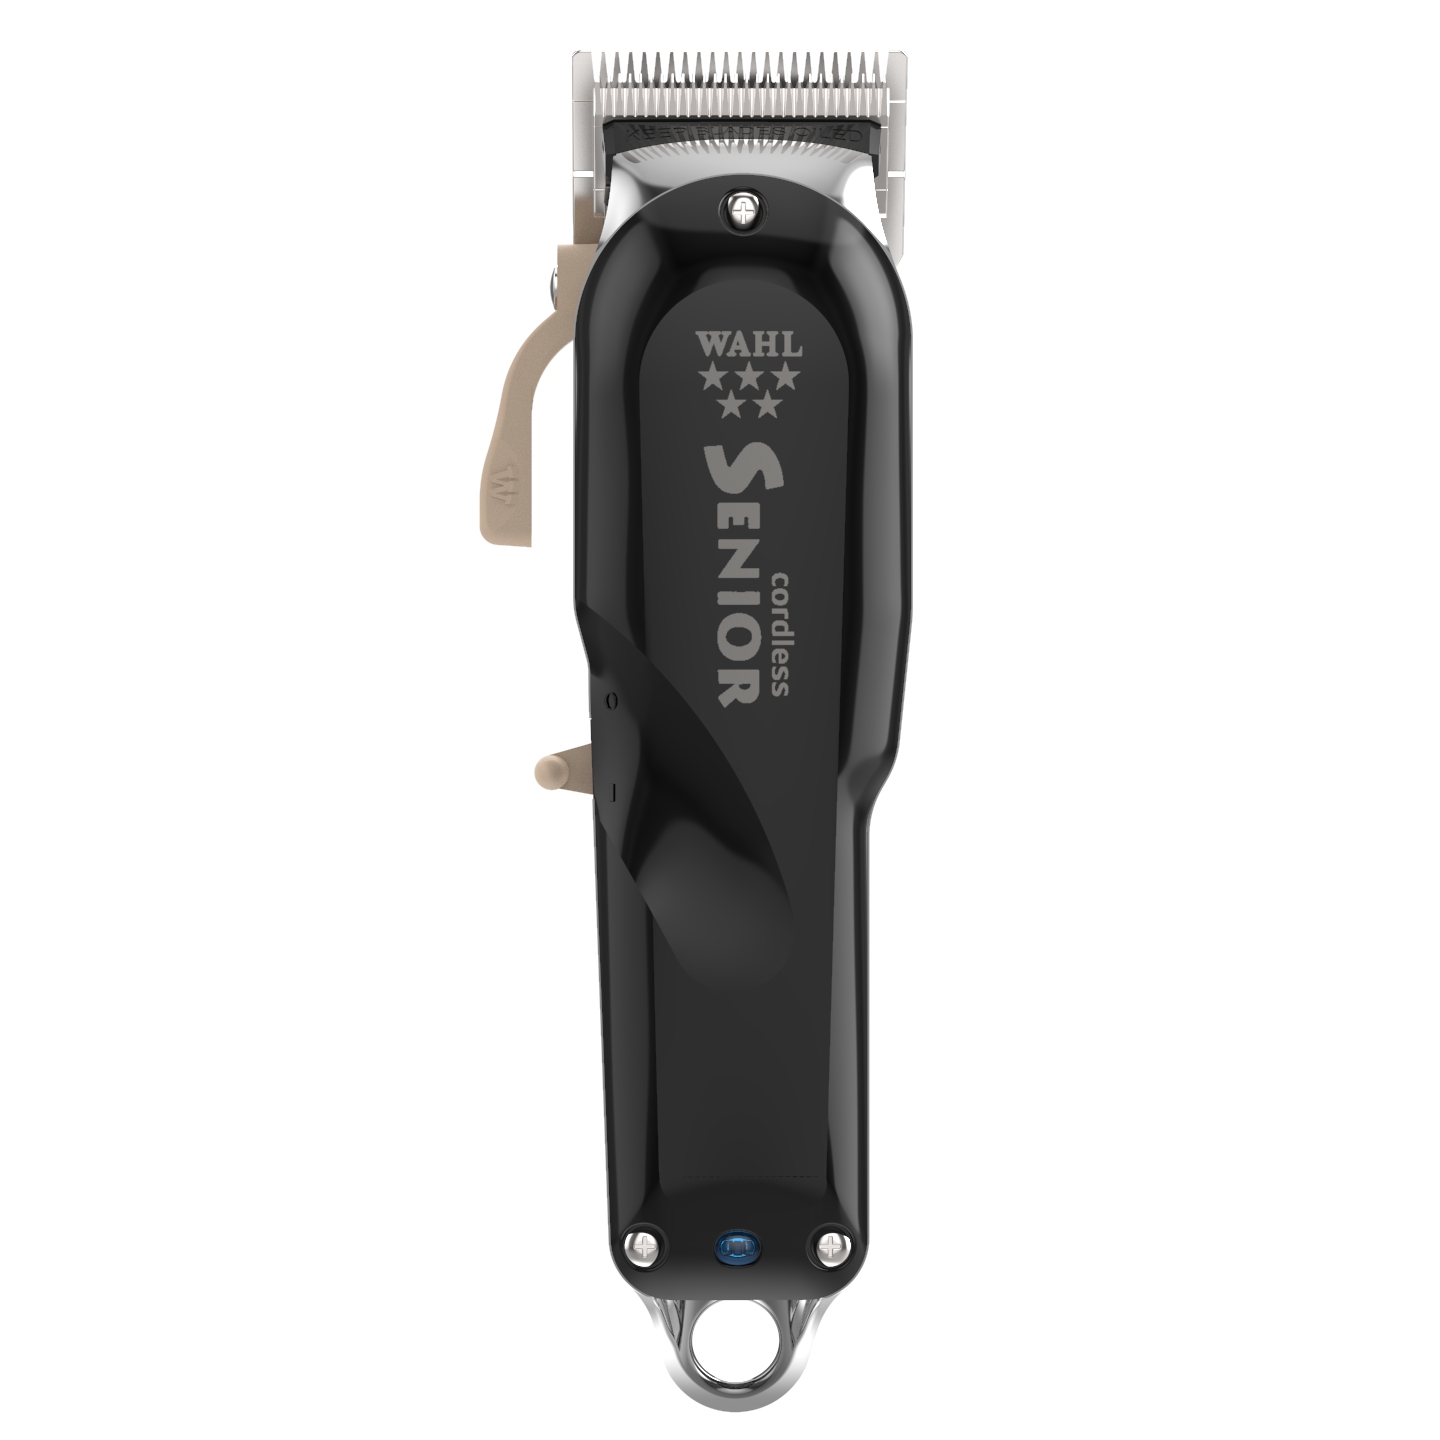 Wahl Cordless Senior Clippers